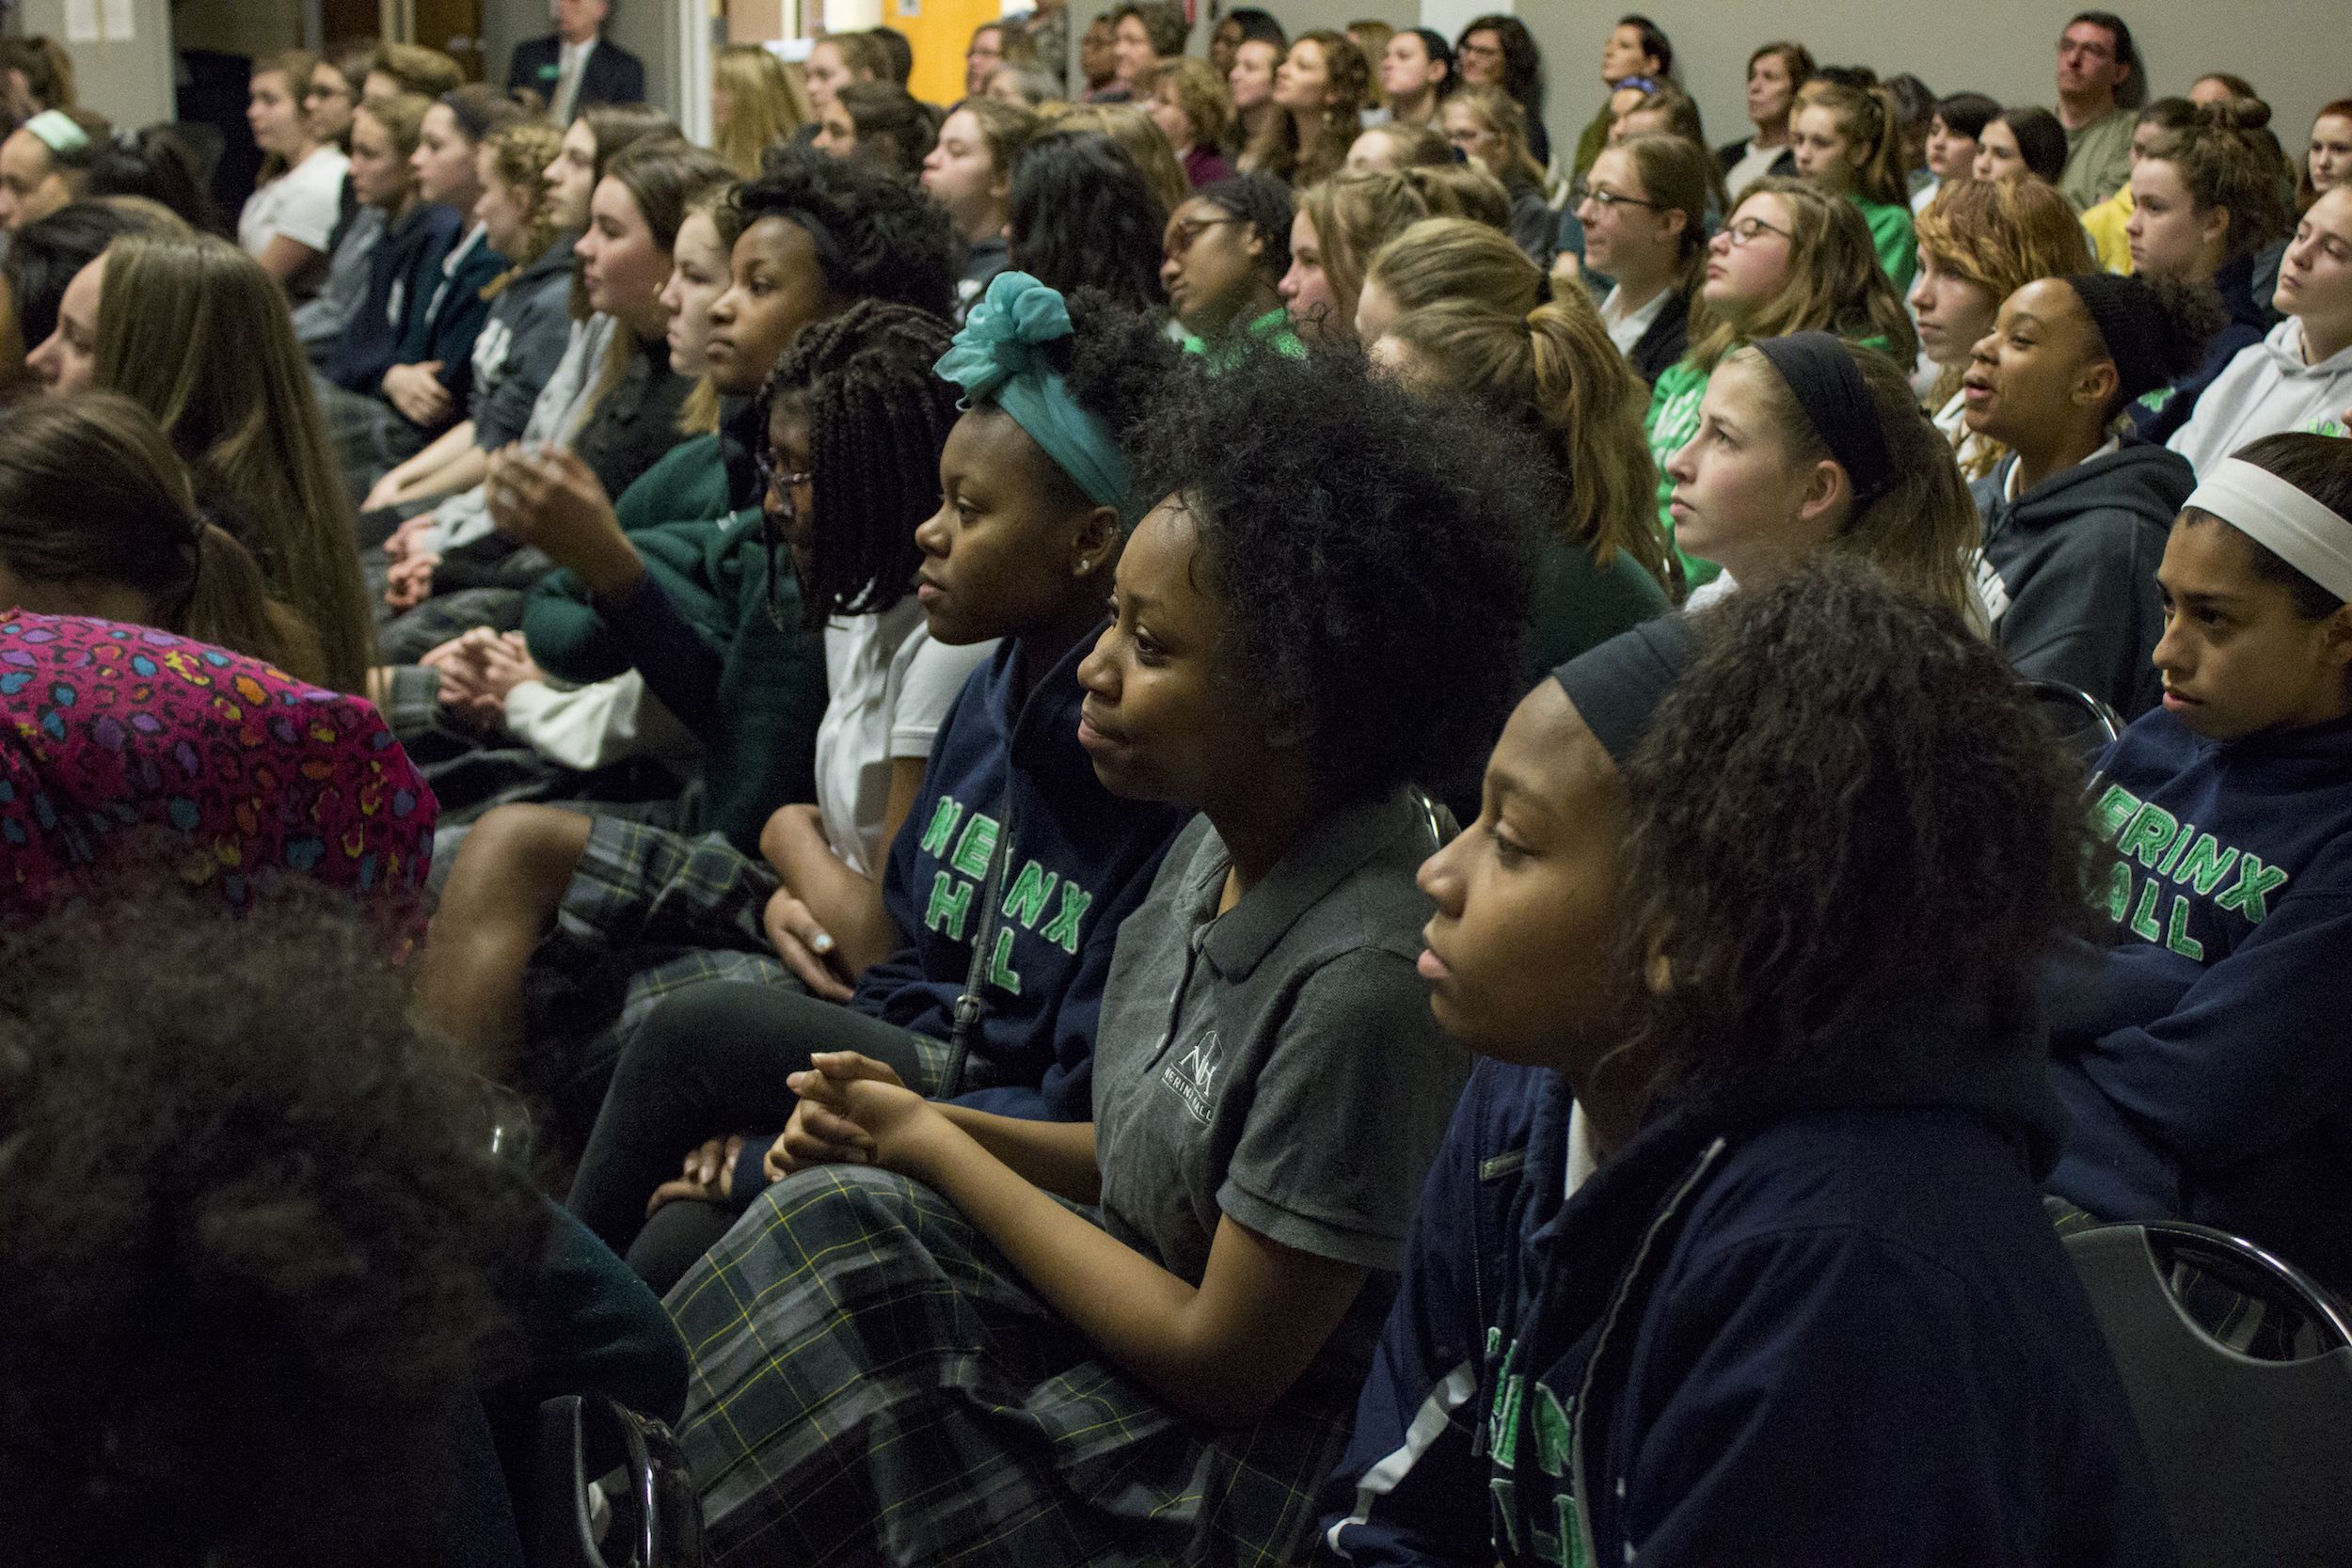 Students welcome speakers Jon Sawyer, Madeleine Albright and Stephen Hadley for a campus-wide Q&A at Nerinx Hall High School in St. Louis, Missouri. Image by Lauren Shepherd, United States, 2017.